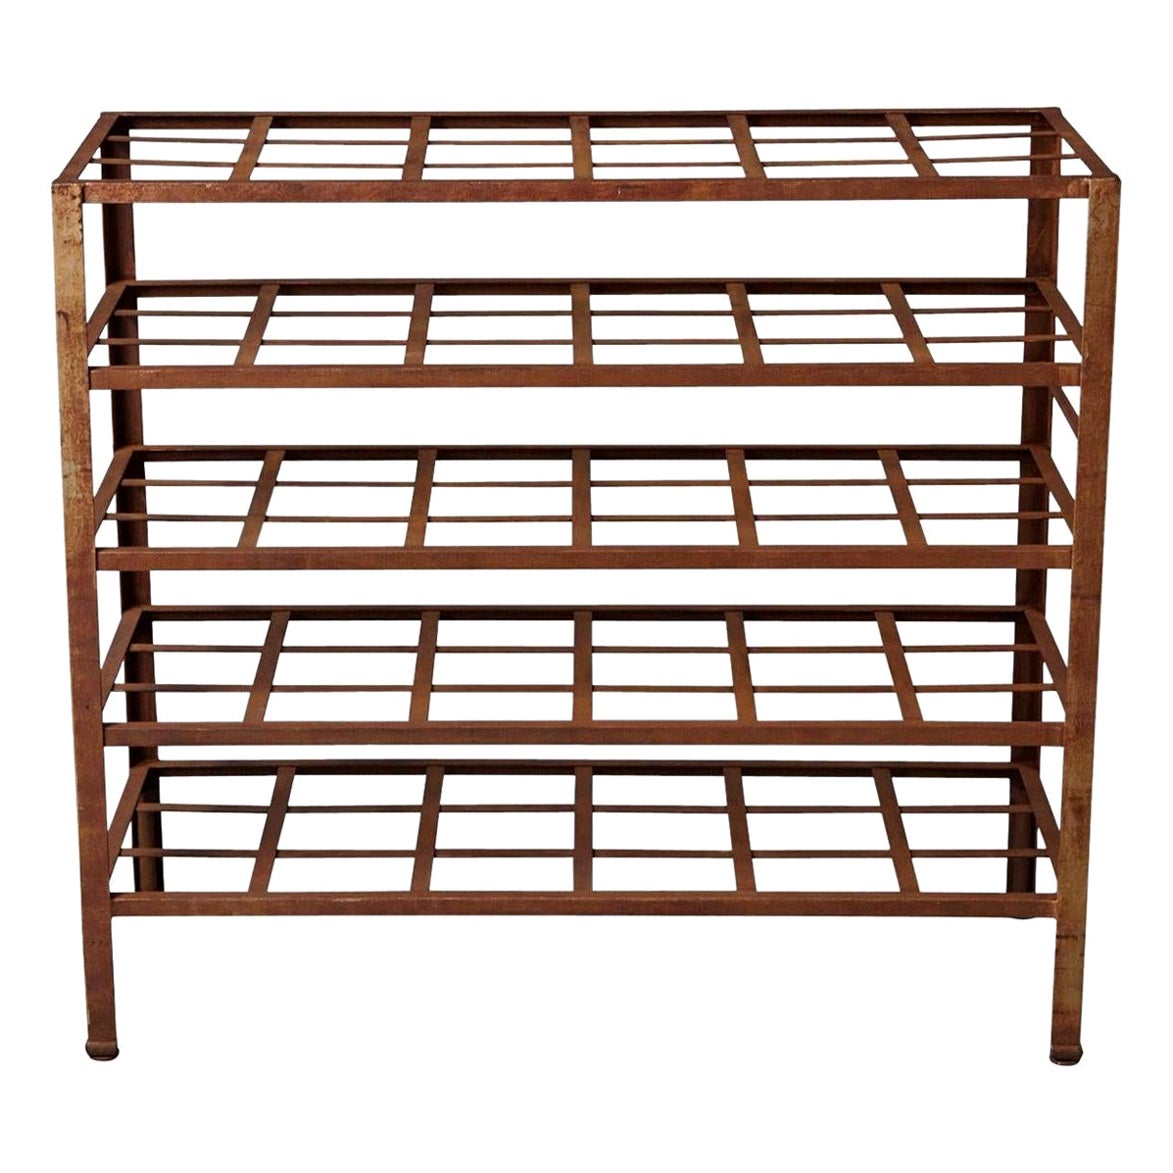 Industrial 5 Tier Shelf with Grid Shelves for Books or Usage as Seedling Planter For Sale